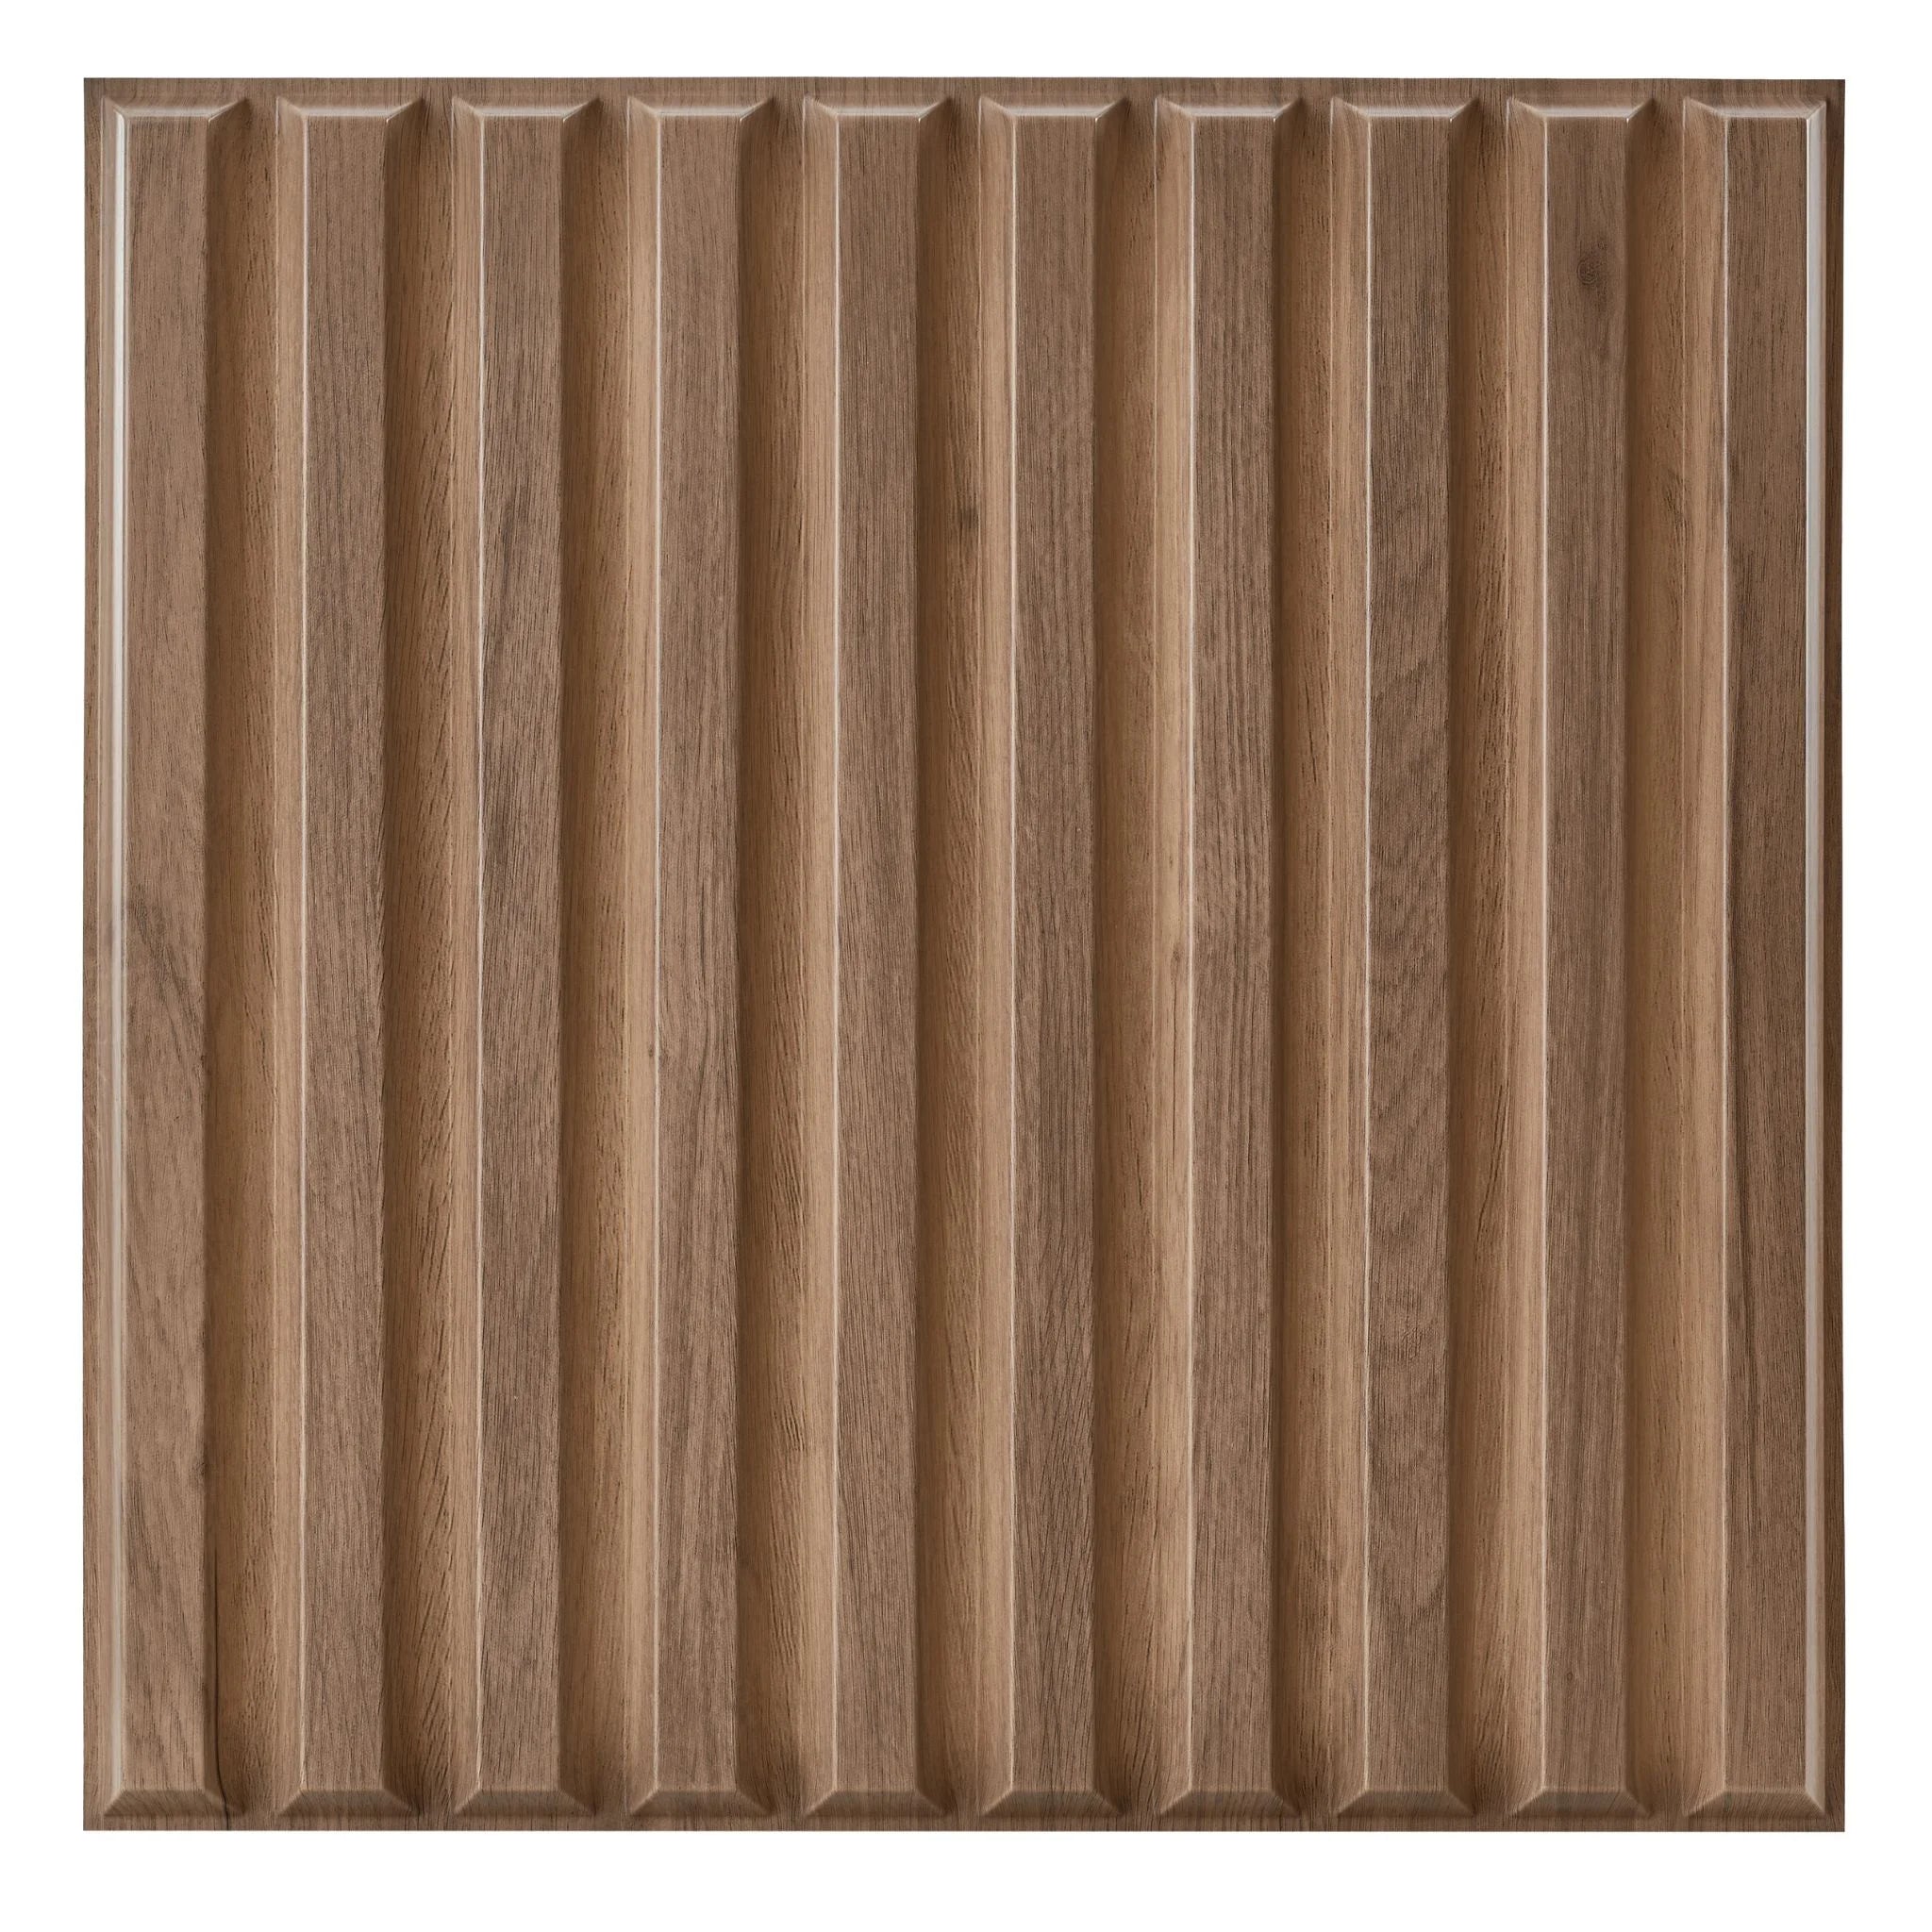 Wooden PVC wall panel with vertical ribbed design